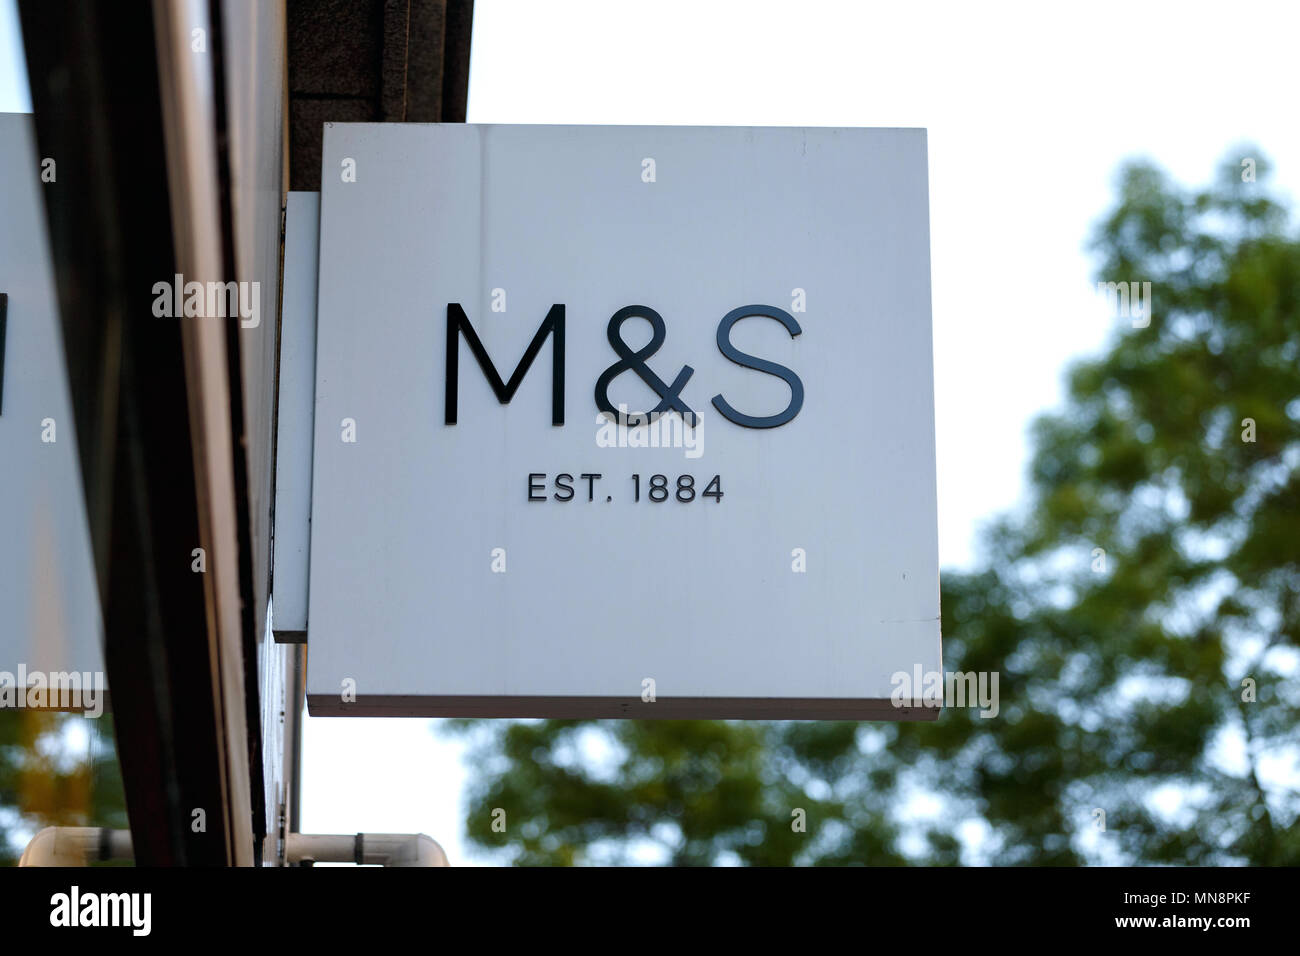 A branch of Marks & Spencers (M&S) in the United Kingdom / M&S logo, M&S sign, Marks & Spencers logo, Marks & Spencers sign. Stock Photo